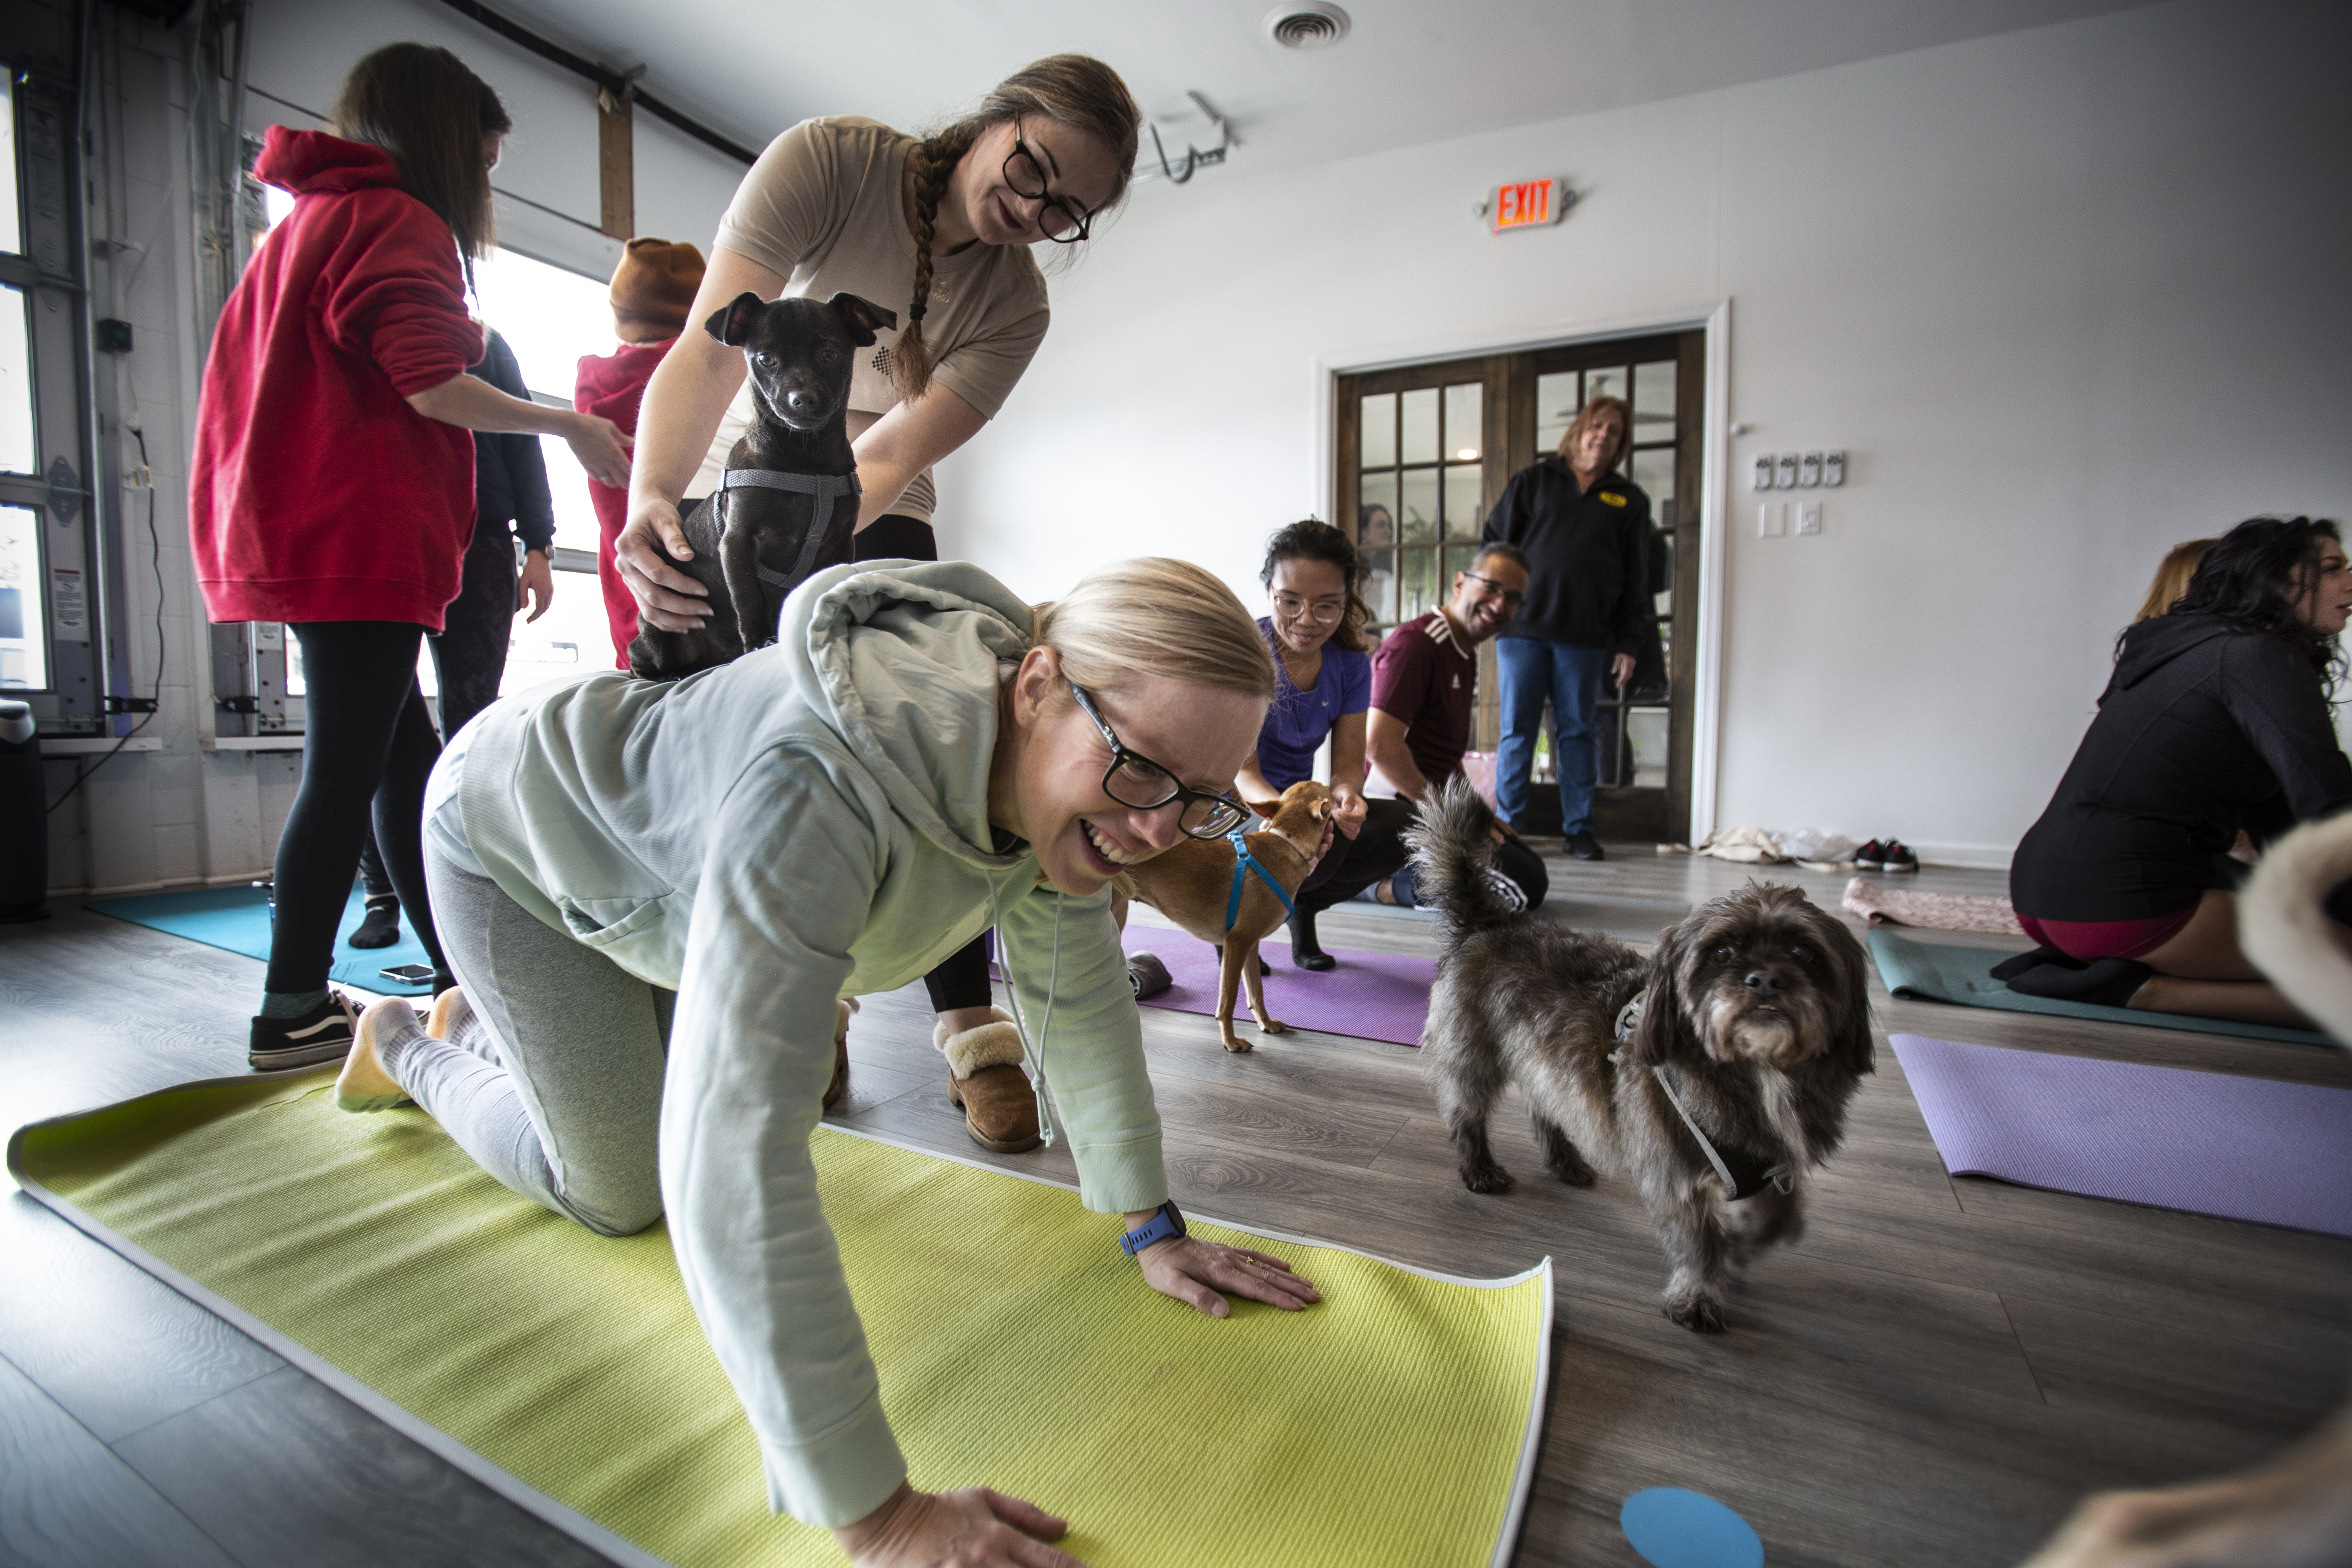 Doggy noses and yoga poses: Local event aims to match flexible